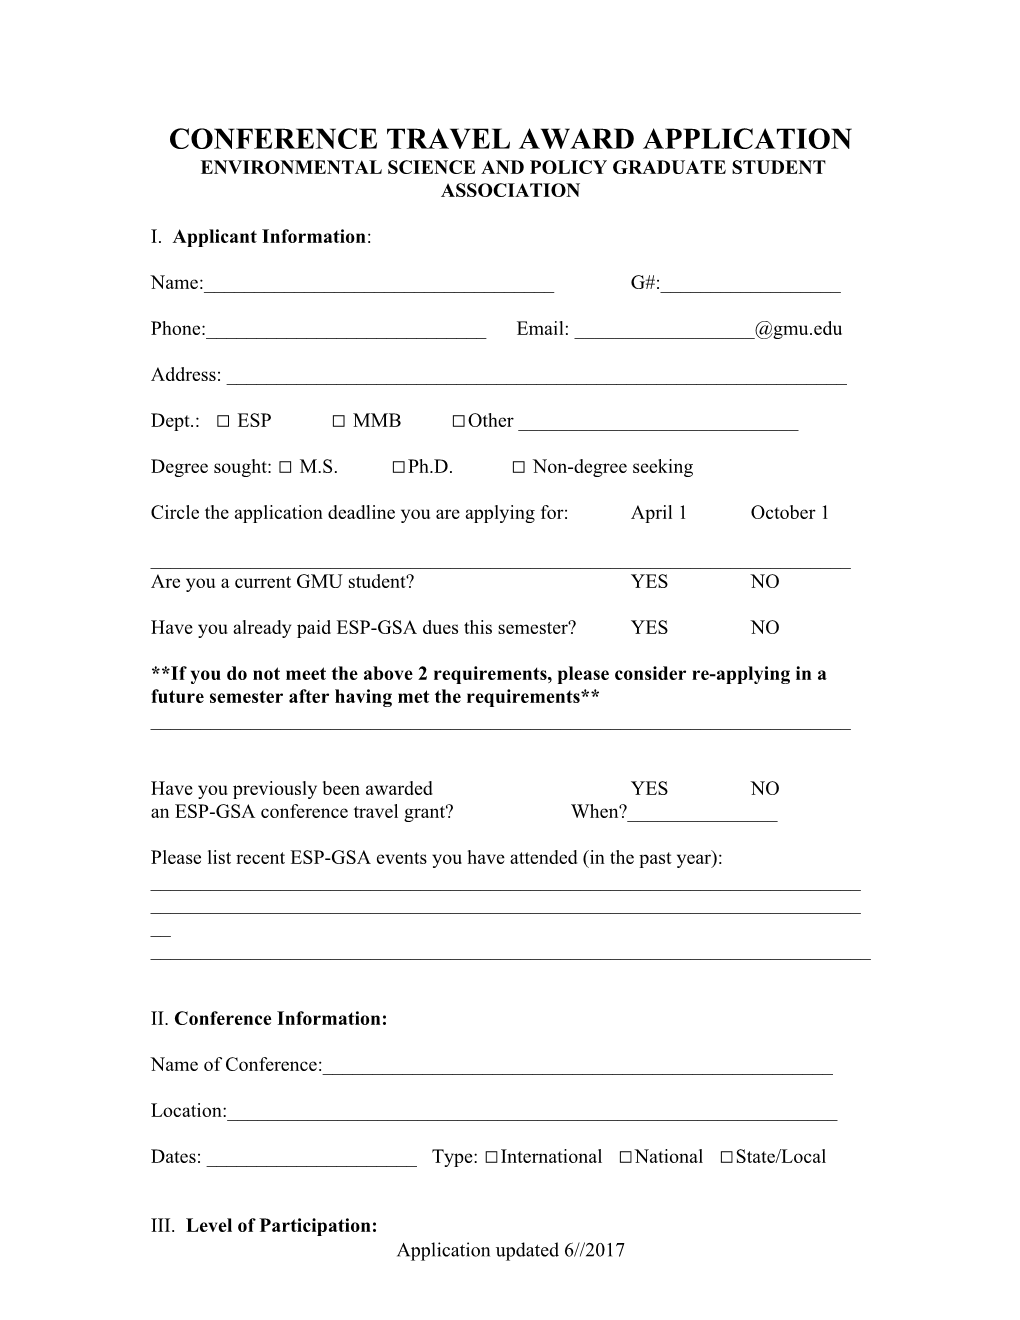 Conference Travel Award Application